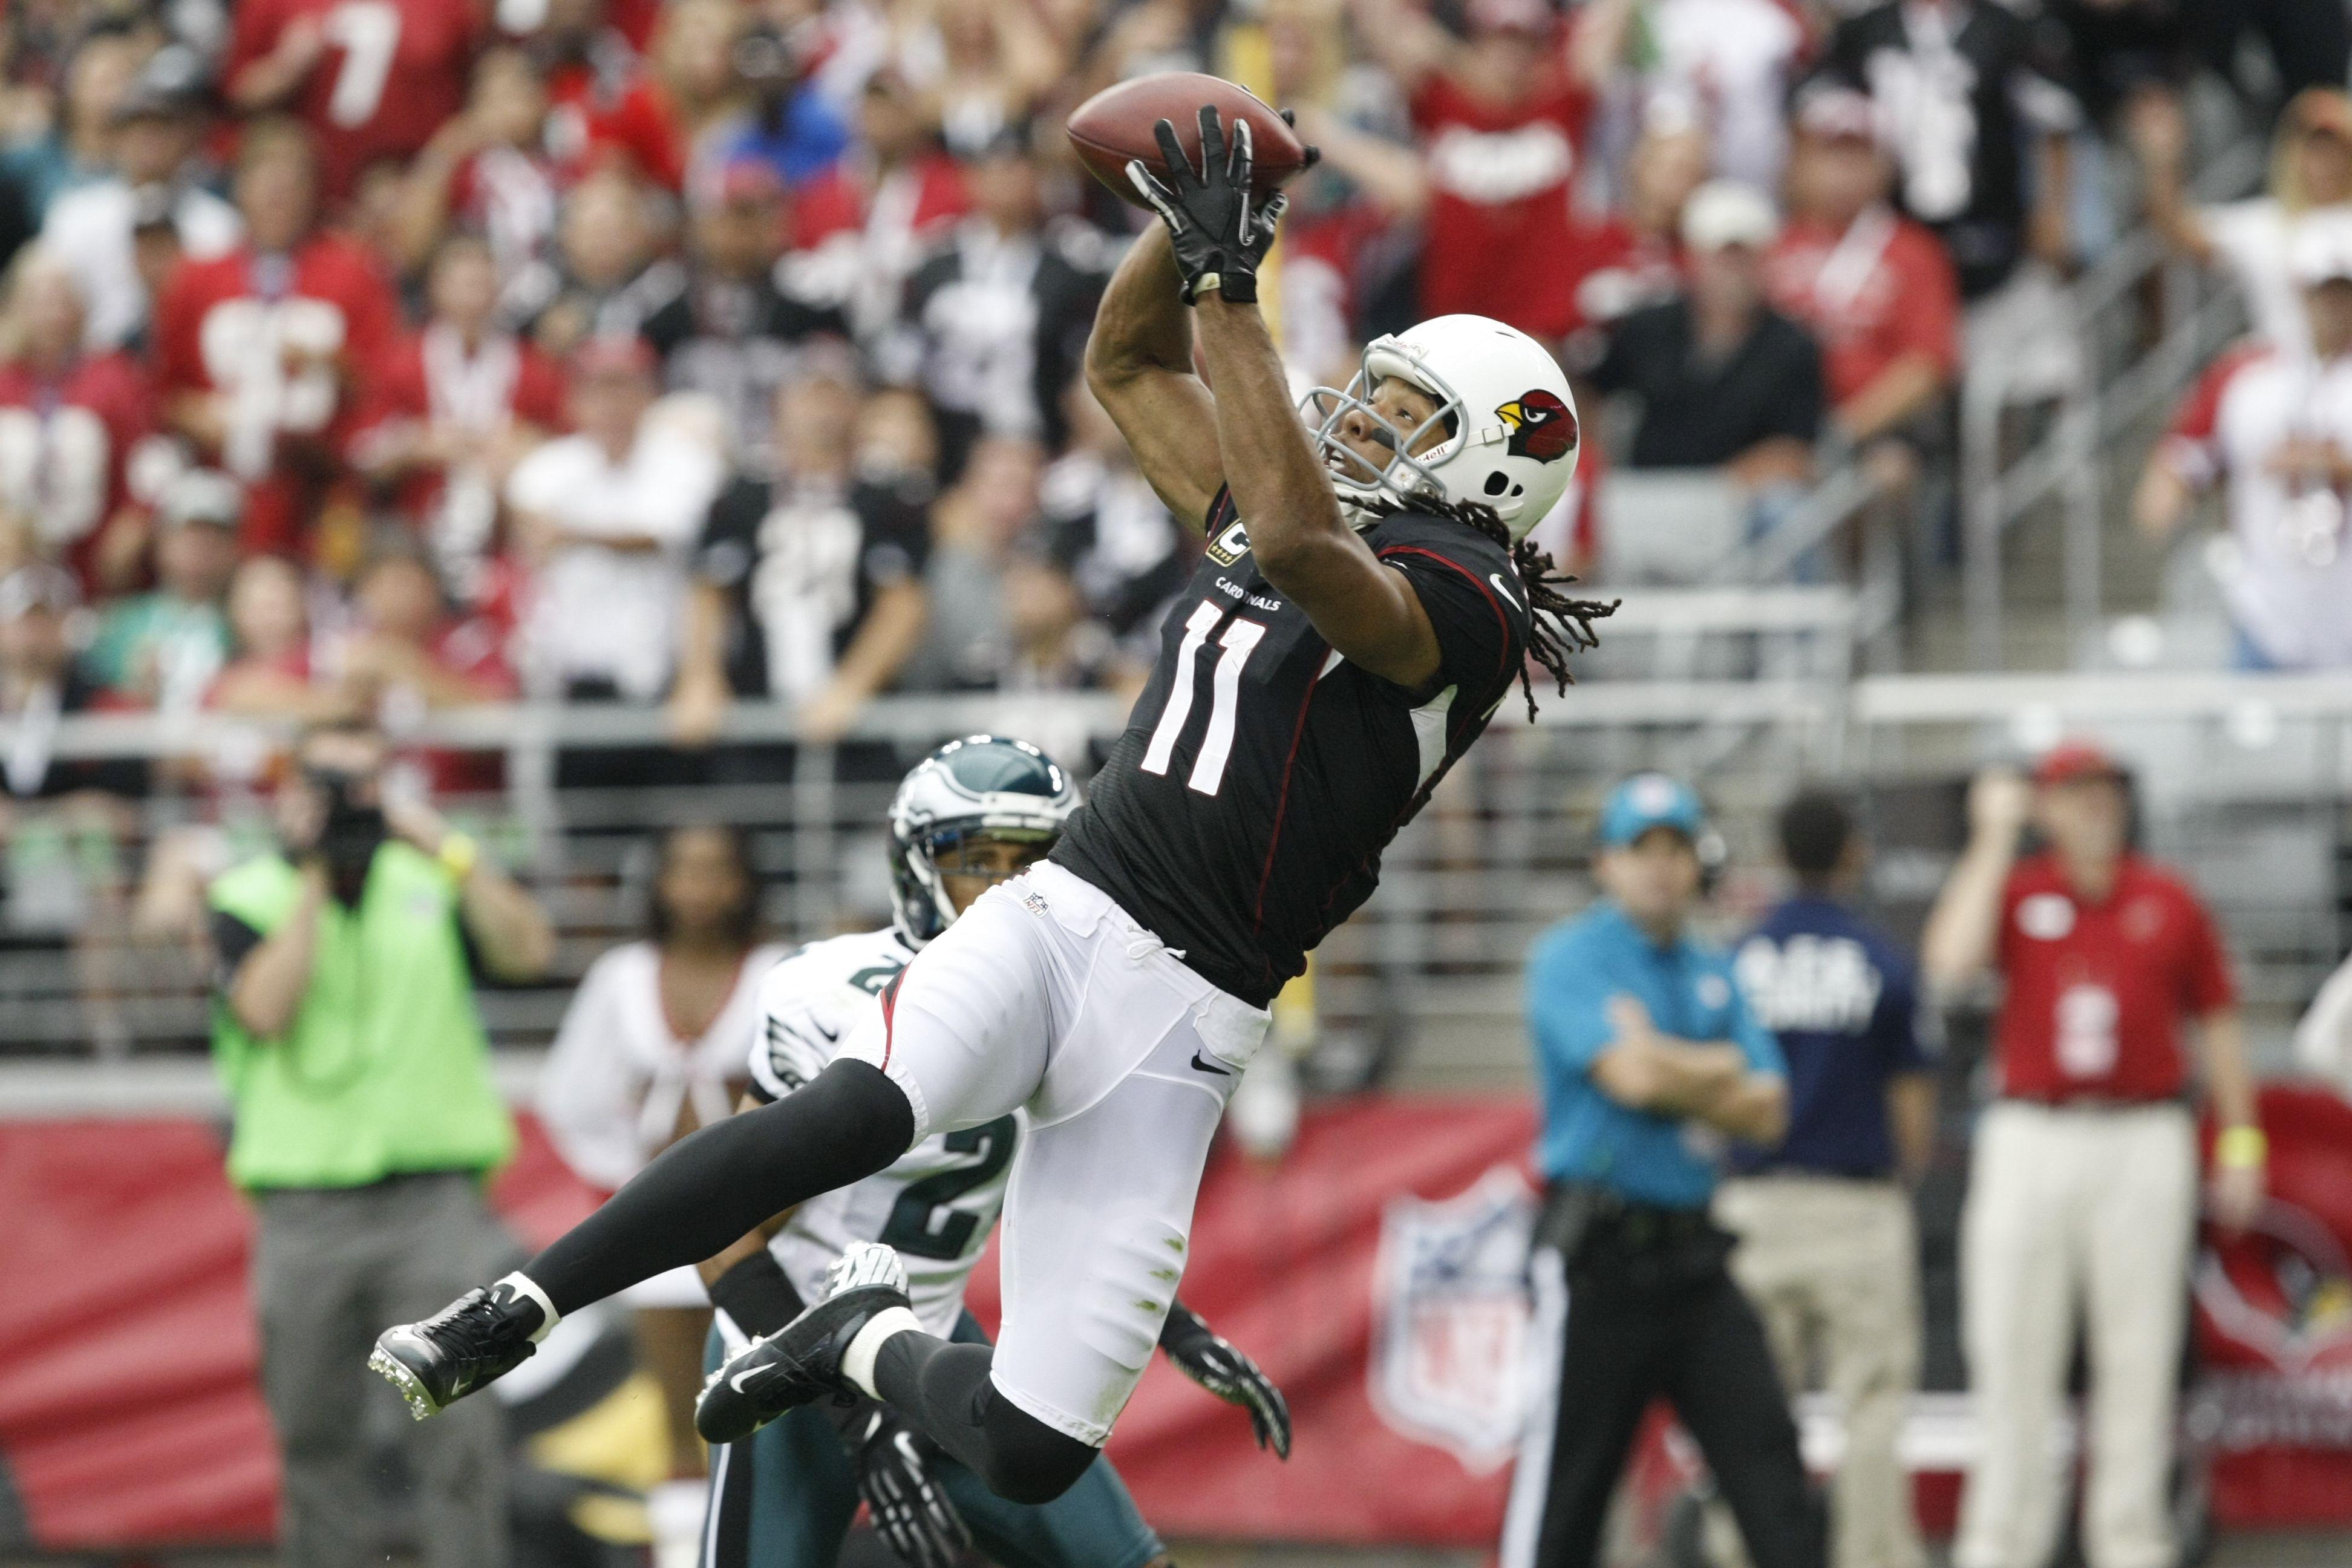 Larry Fitzgerald's best touchdowns, in image